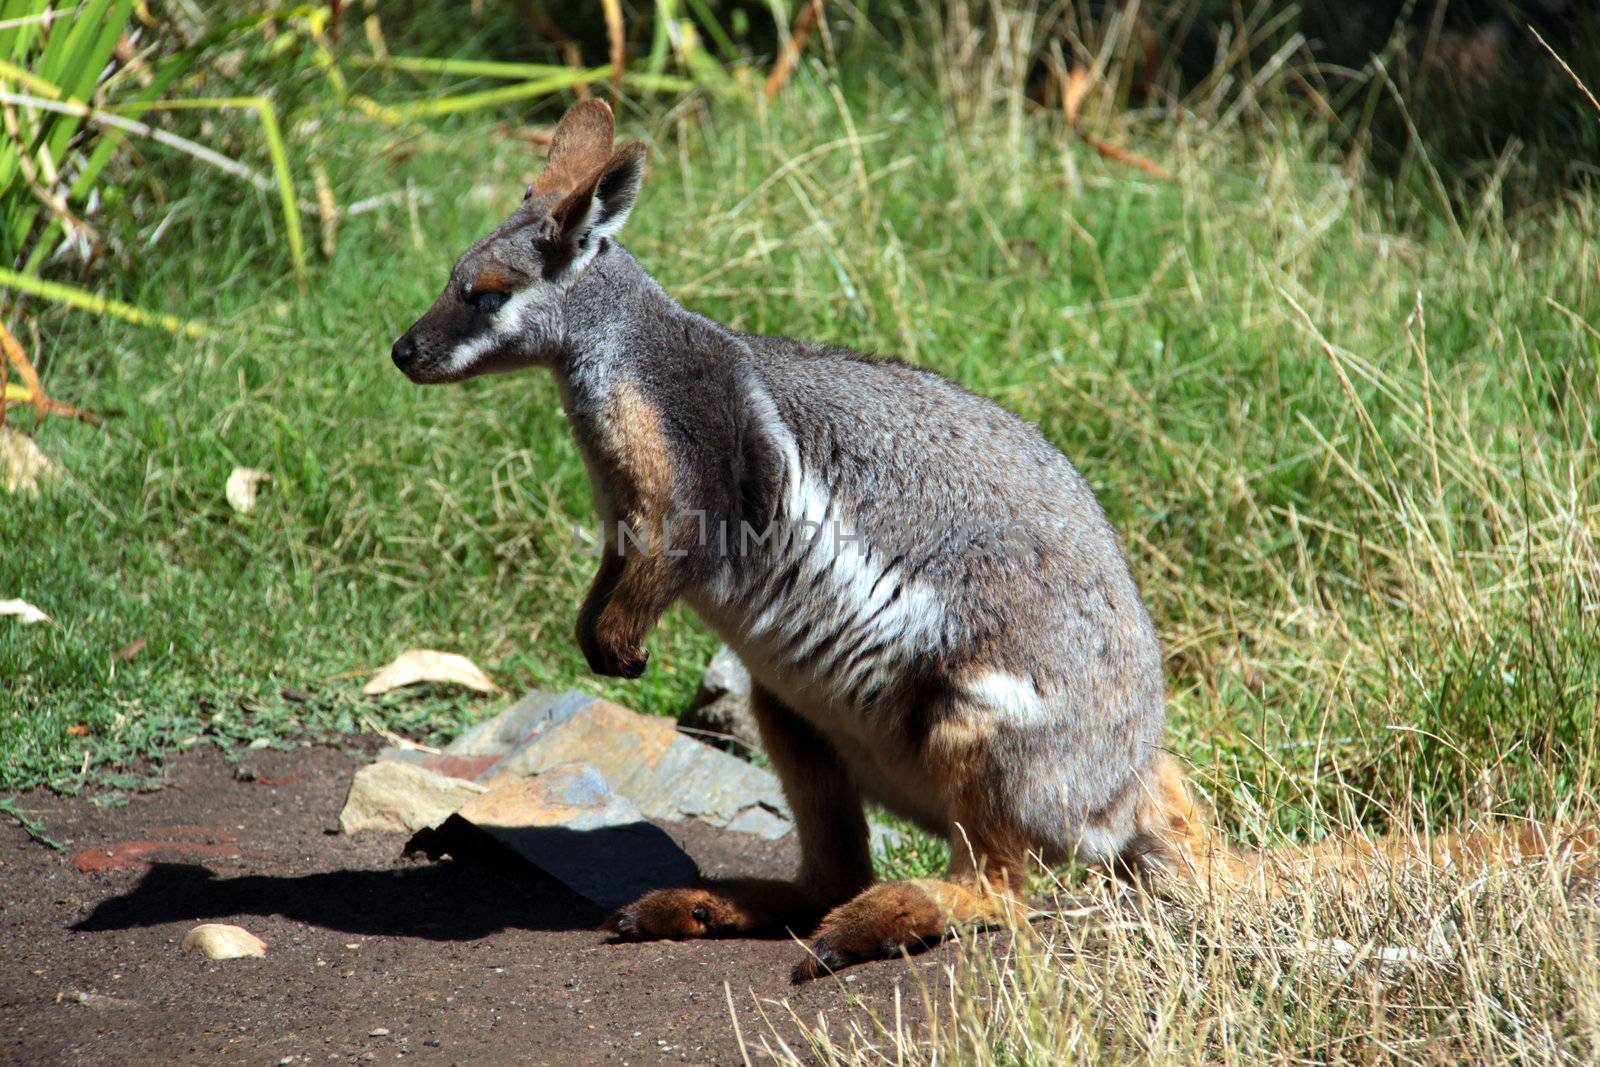 Yellow-Footed Rock-Wallaby in Long Green Grass. Native Australia by Cloudia